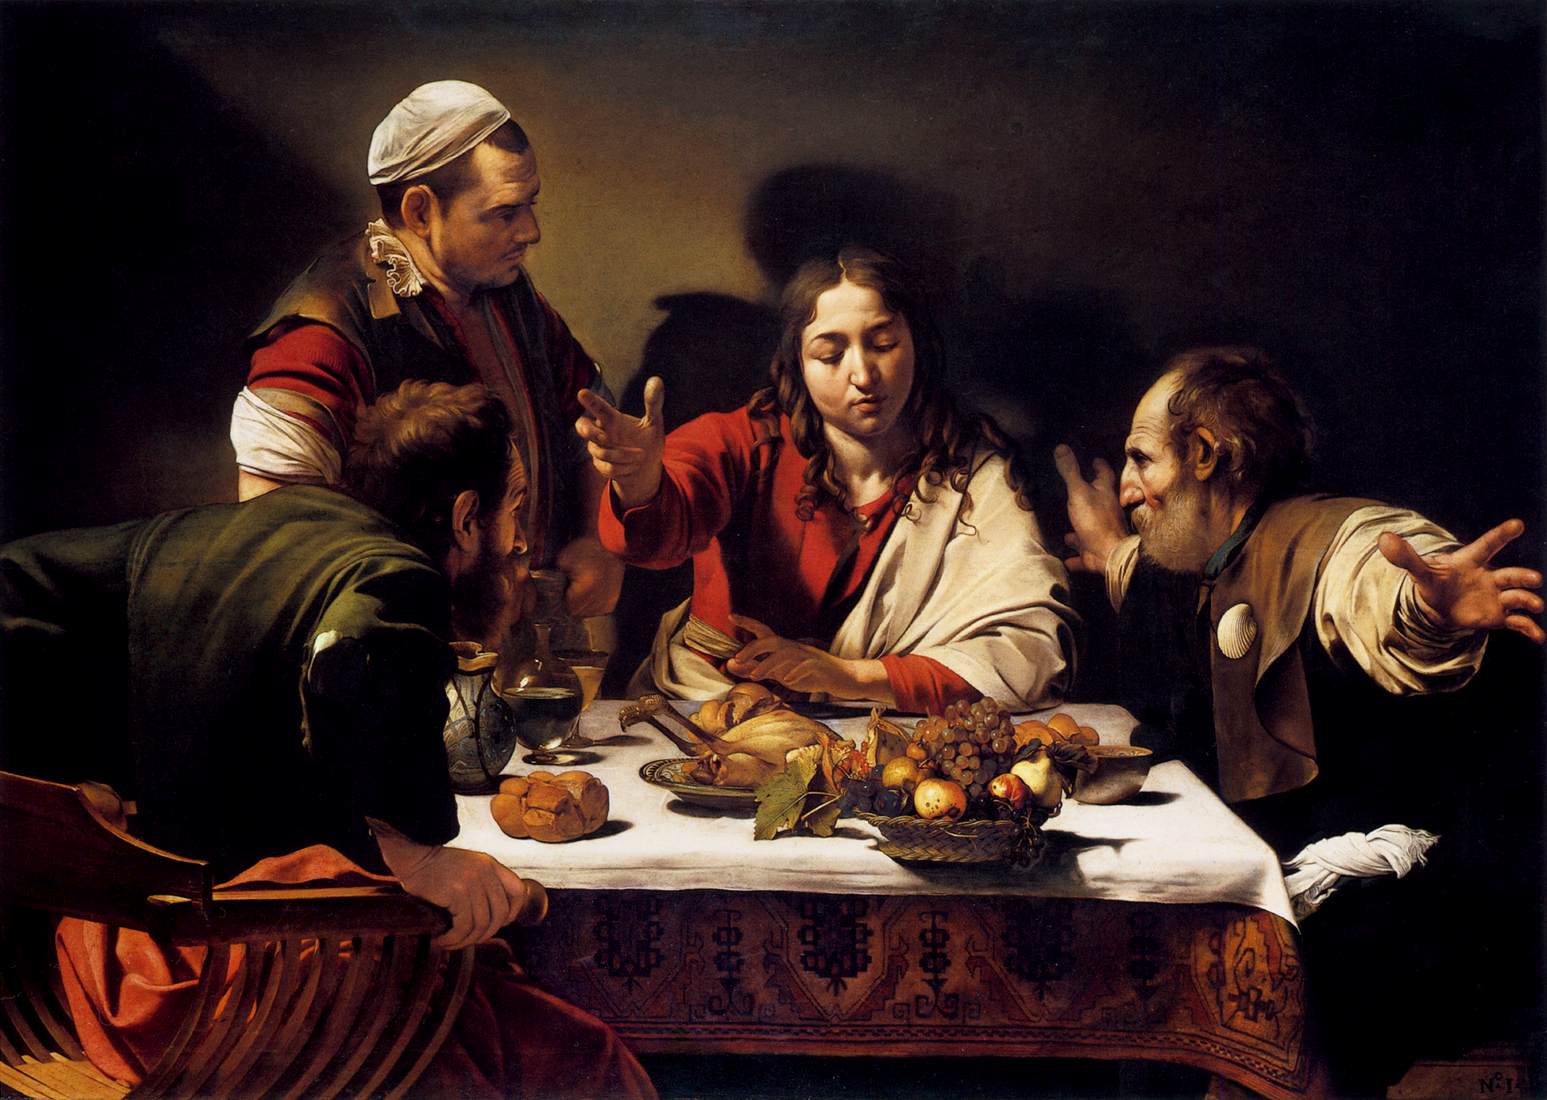 Easter Monday - Caravaggio Supper at Emmaus